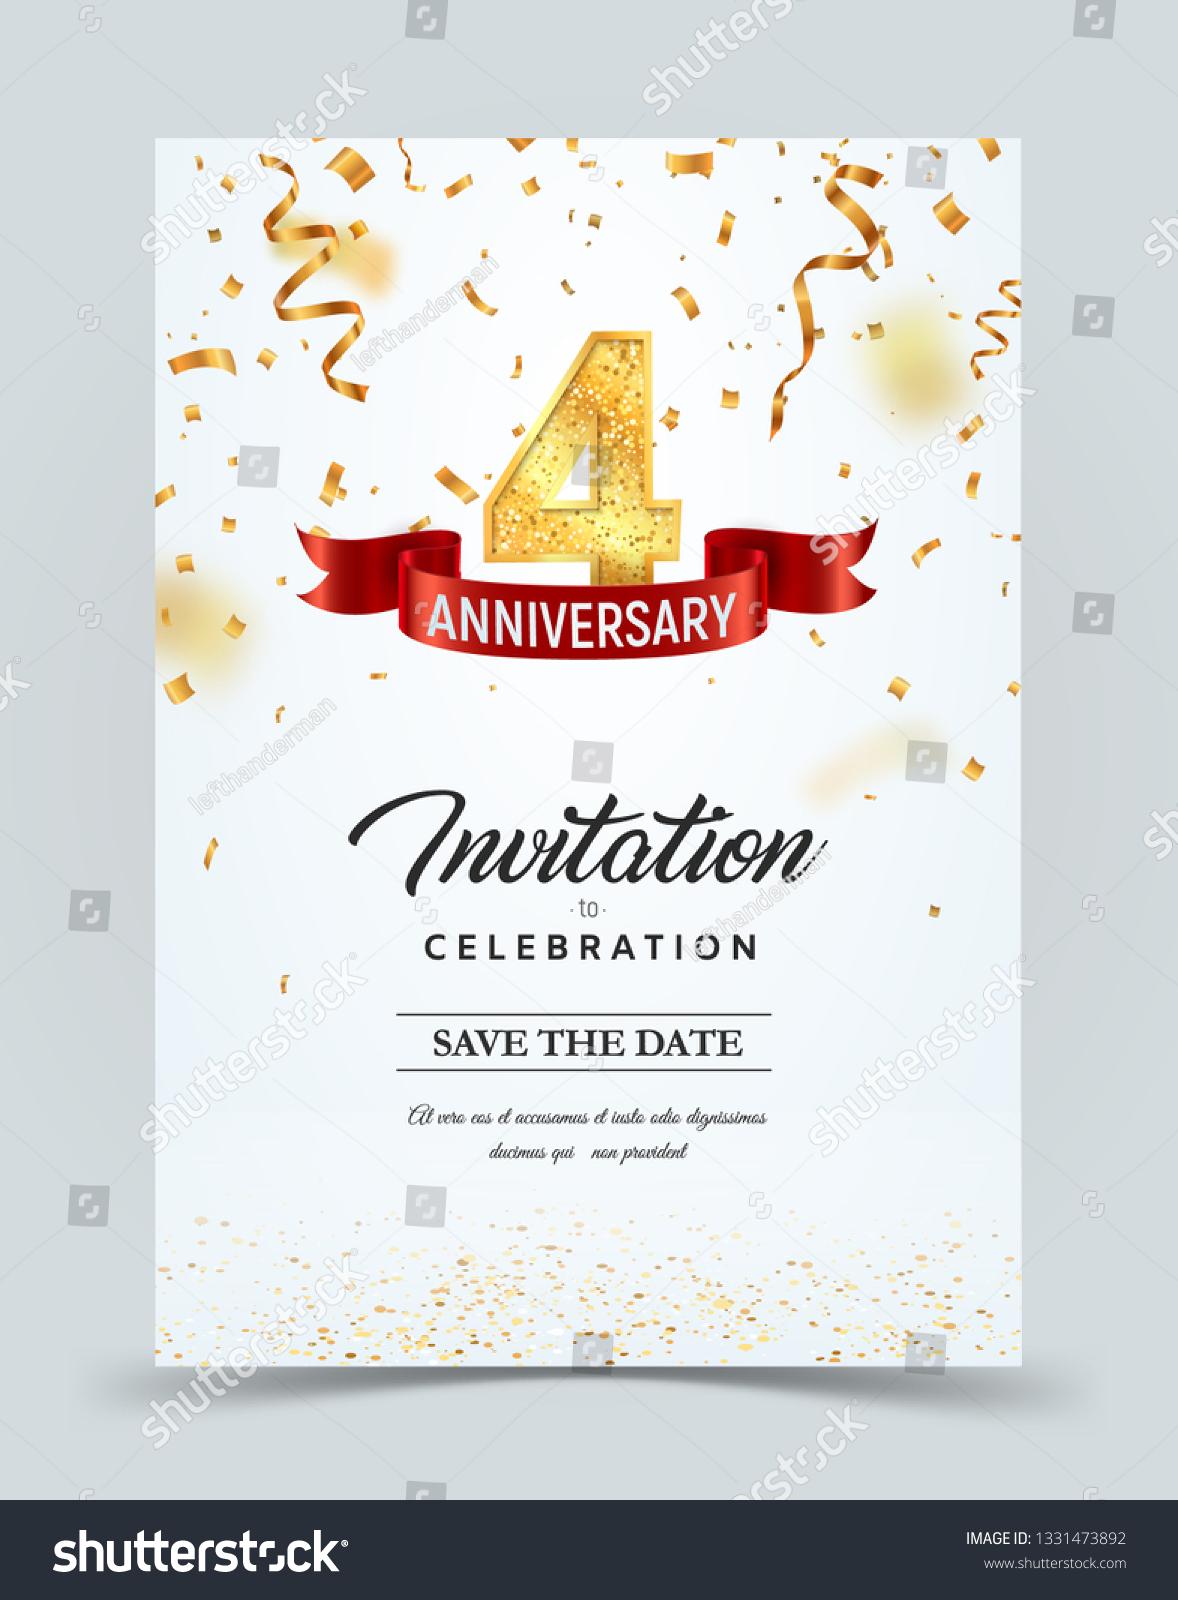 SVG of Invitation card template of 4 years anniversary with abstract text vector illustration. Greeting card template svg